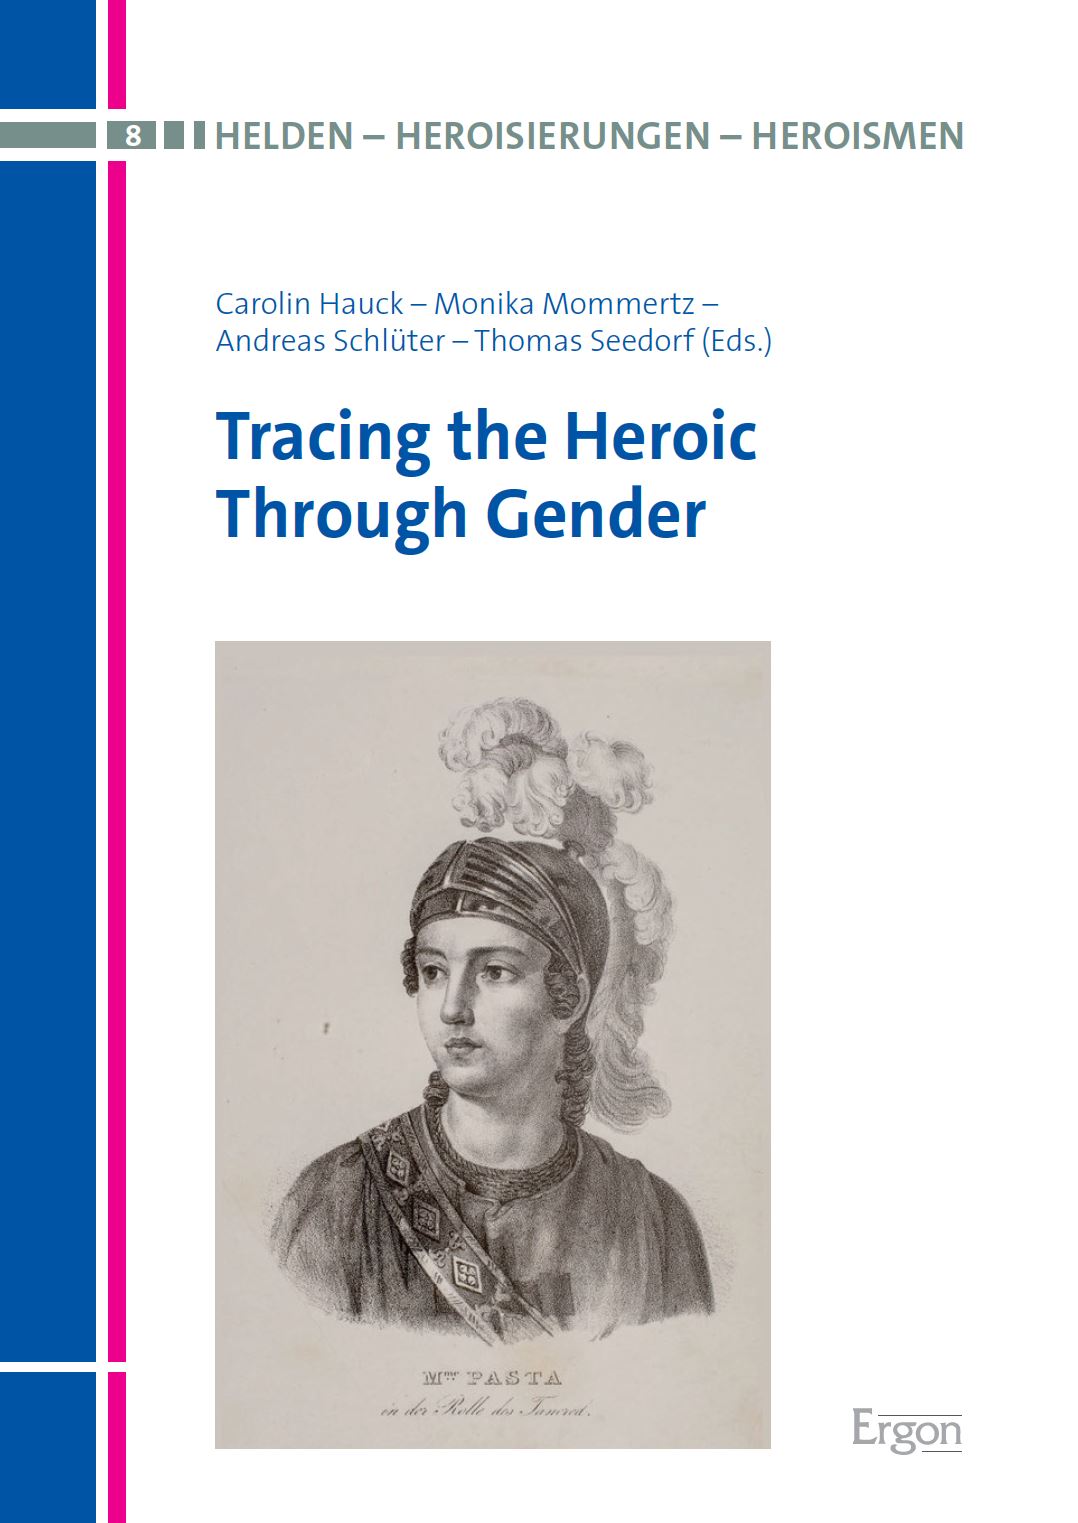 Hauck, u.a., Tracing the Heroic Through Gender